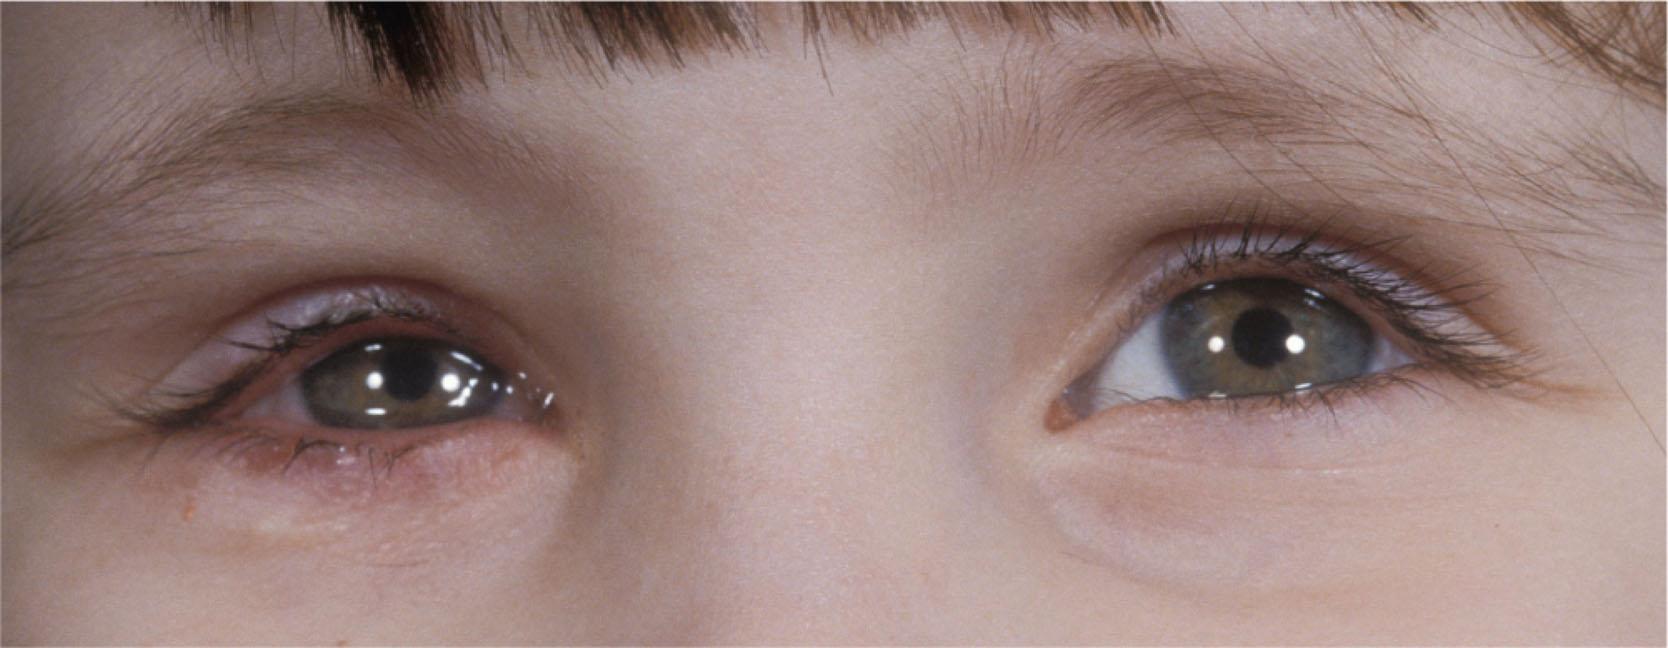 Fig. 15.2, Red and watery right eye of child with blepharokeratoconjunctivitis. There is anterior blepharitis and a reactive ptosis.